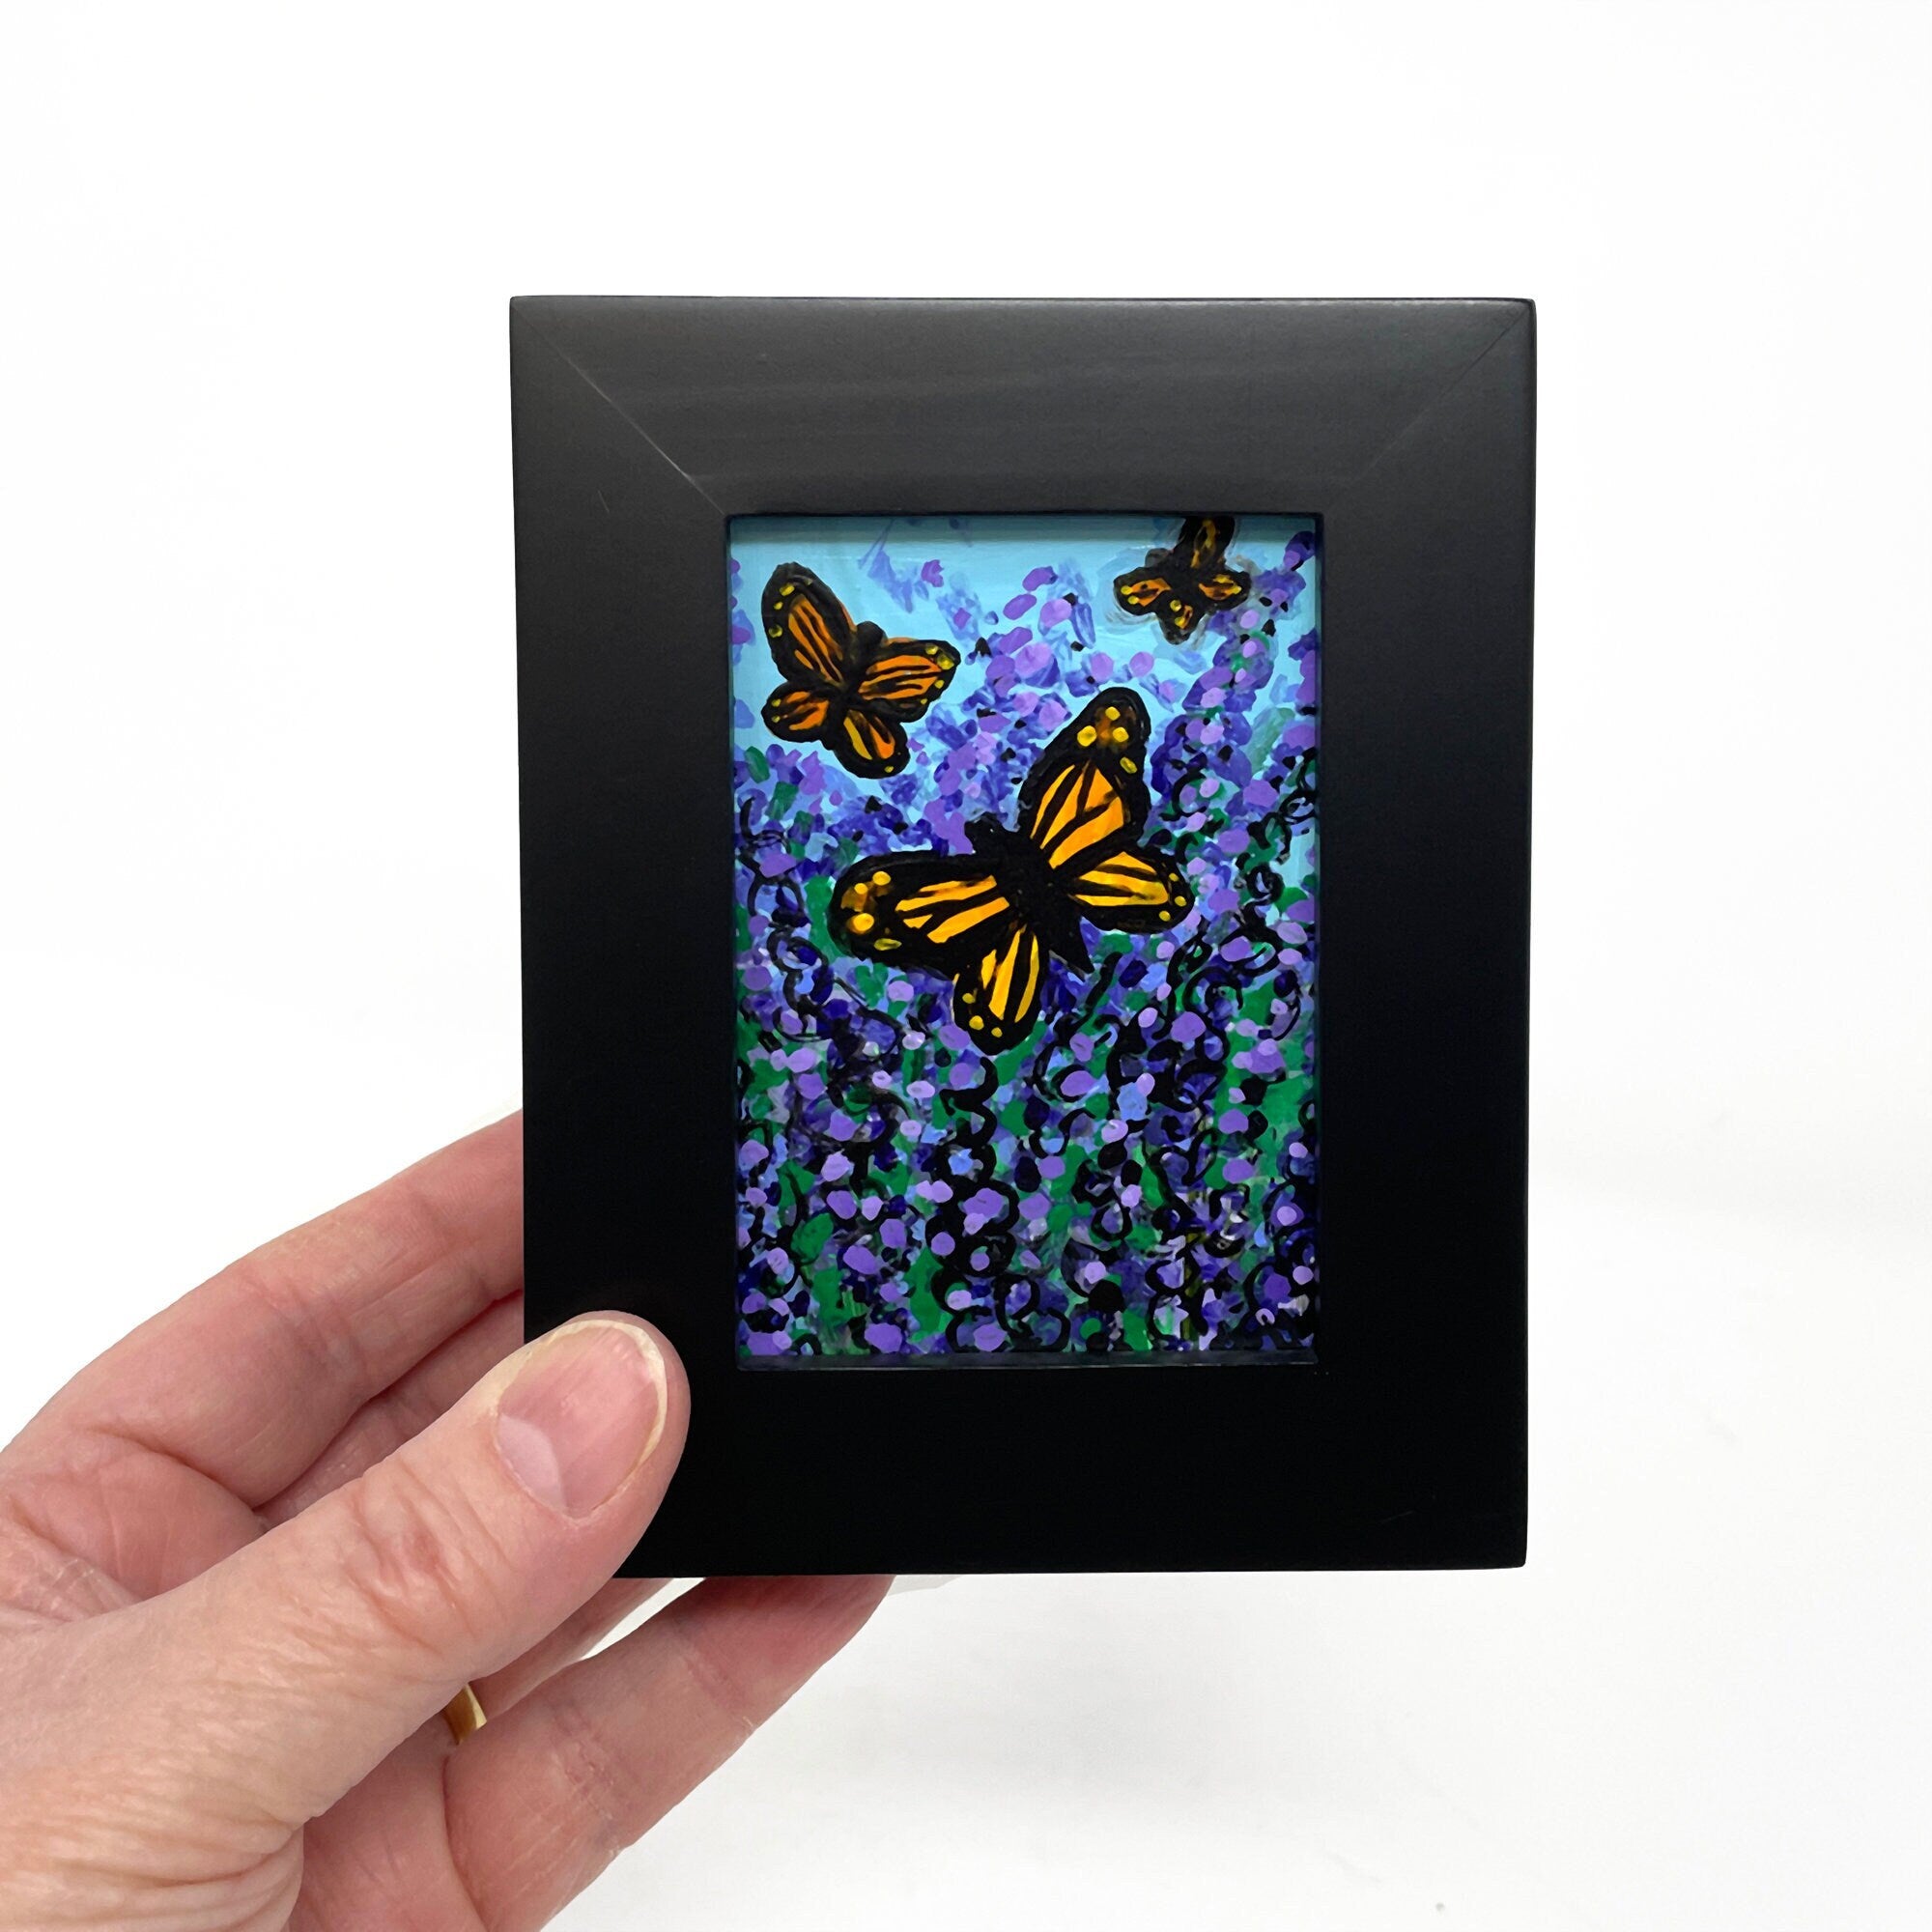 Small Monarch Butterfly Painting - Monarch Butterflies on Lavender - Framed Mini Art for Desk, Shelf, or Wall - Insect, Bug, Flower Art